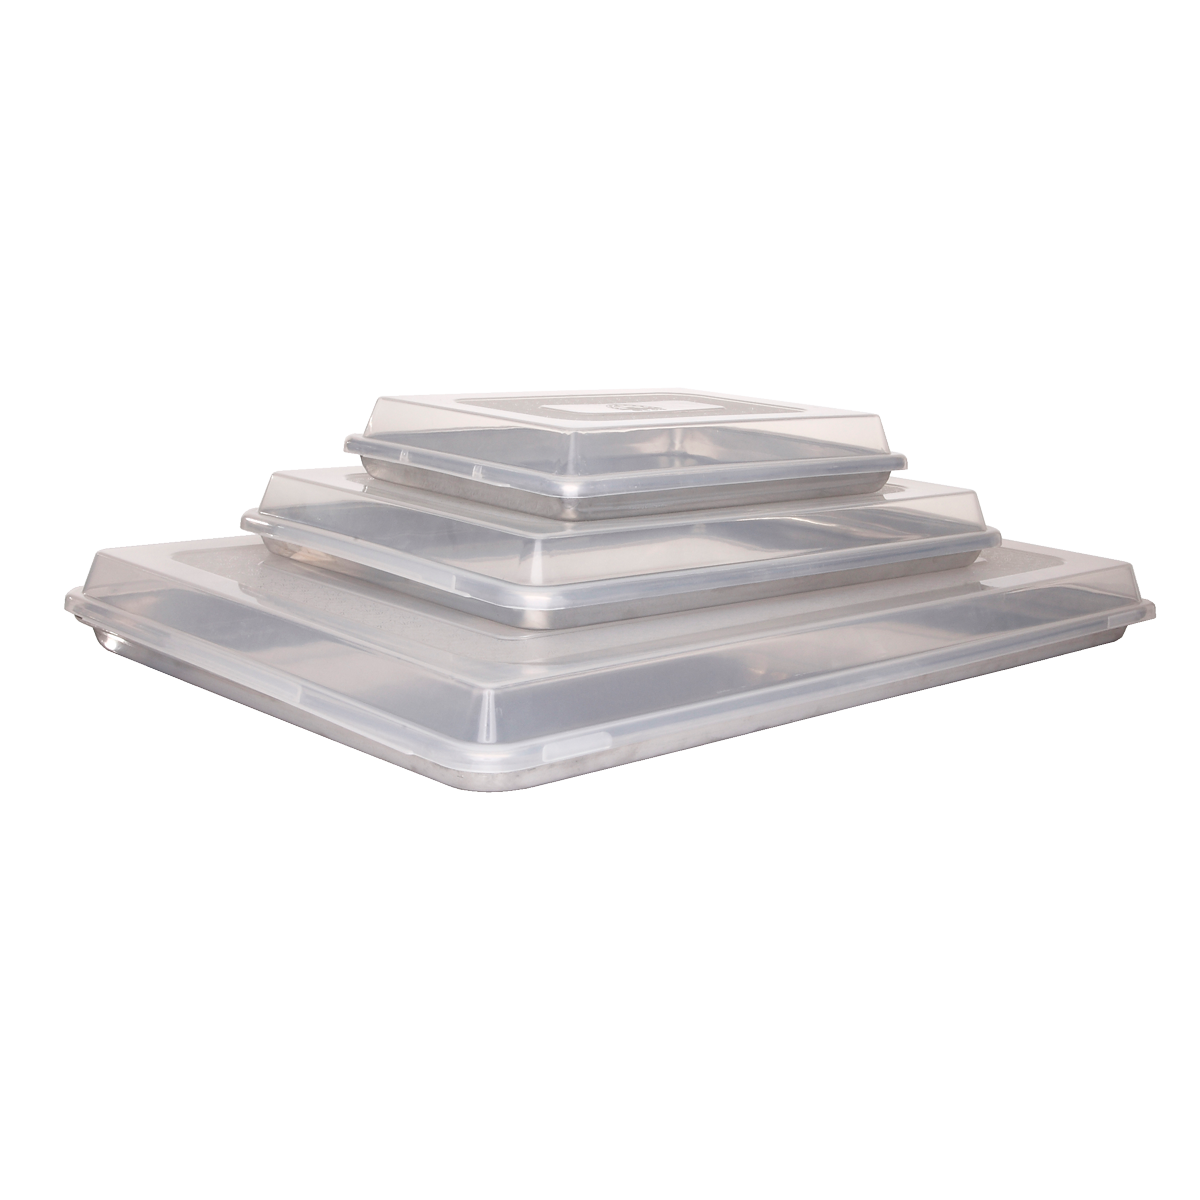 18 X 13 Half Size Sheet Pan Cover, Plastic,Pack of 6